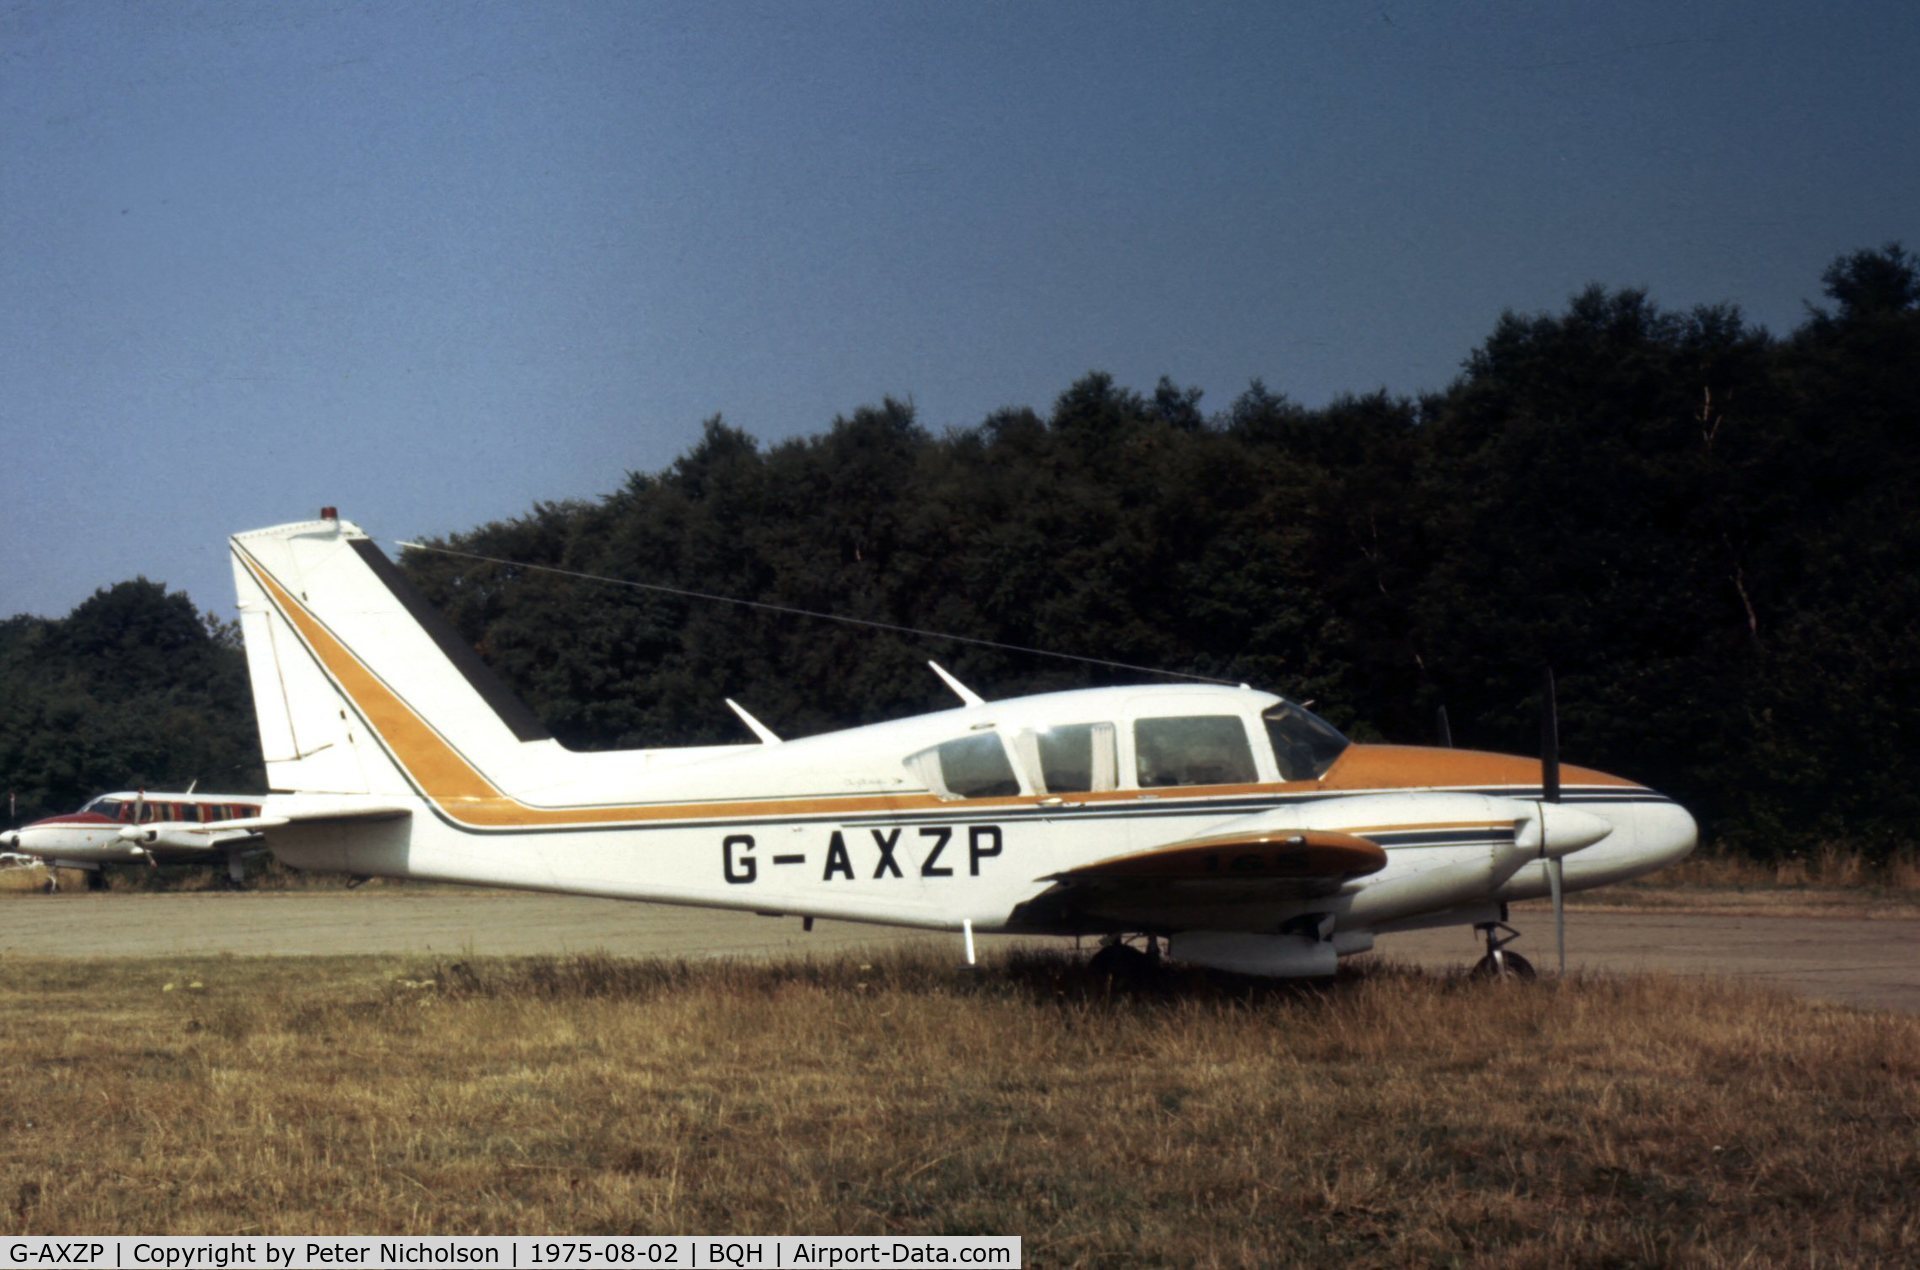 G-AXZP, 1970 Piper PA-E23-250 Aztec C/N 27-4464, This Aztec was seen at Biggin Hill in the Summer of 1975.